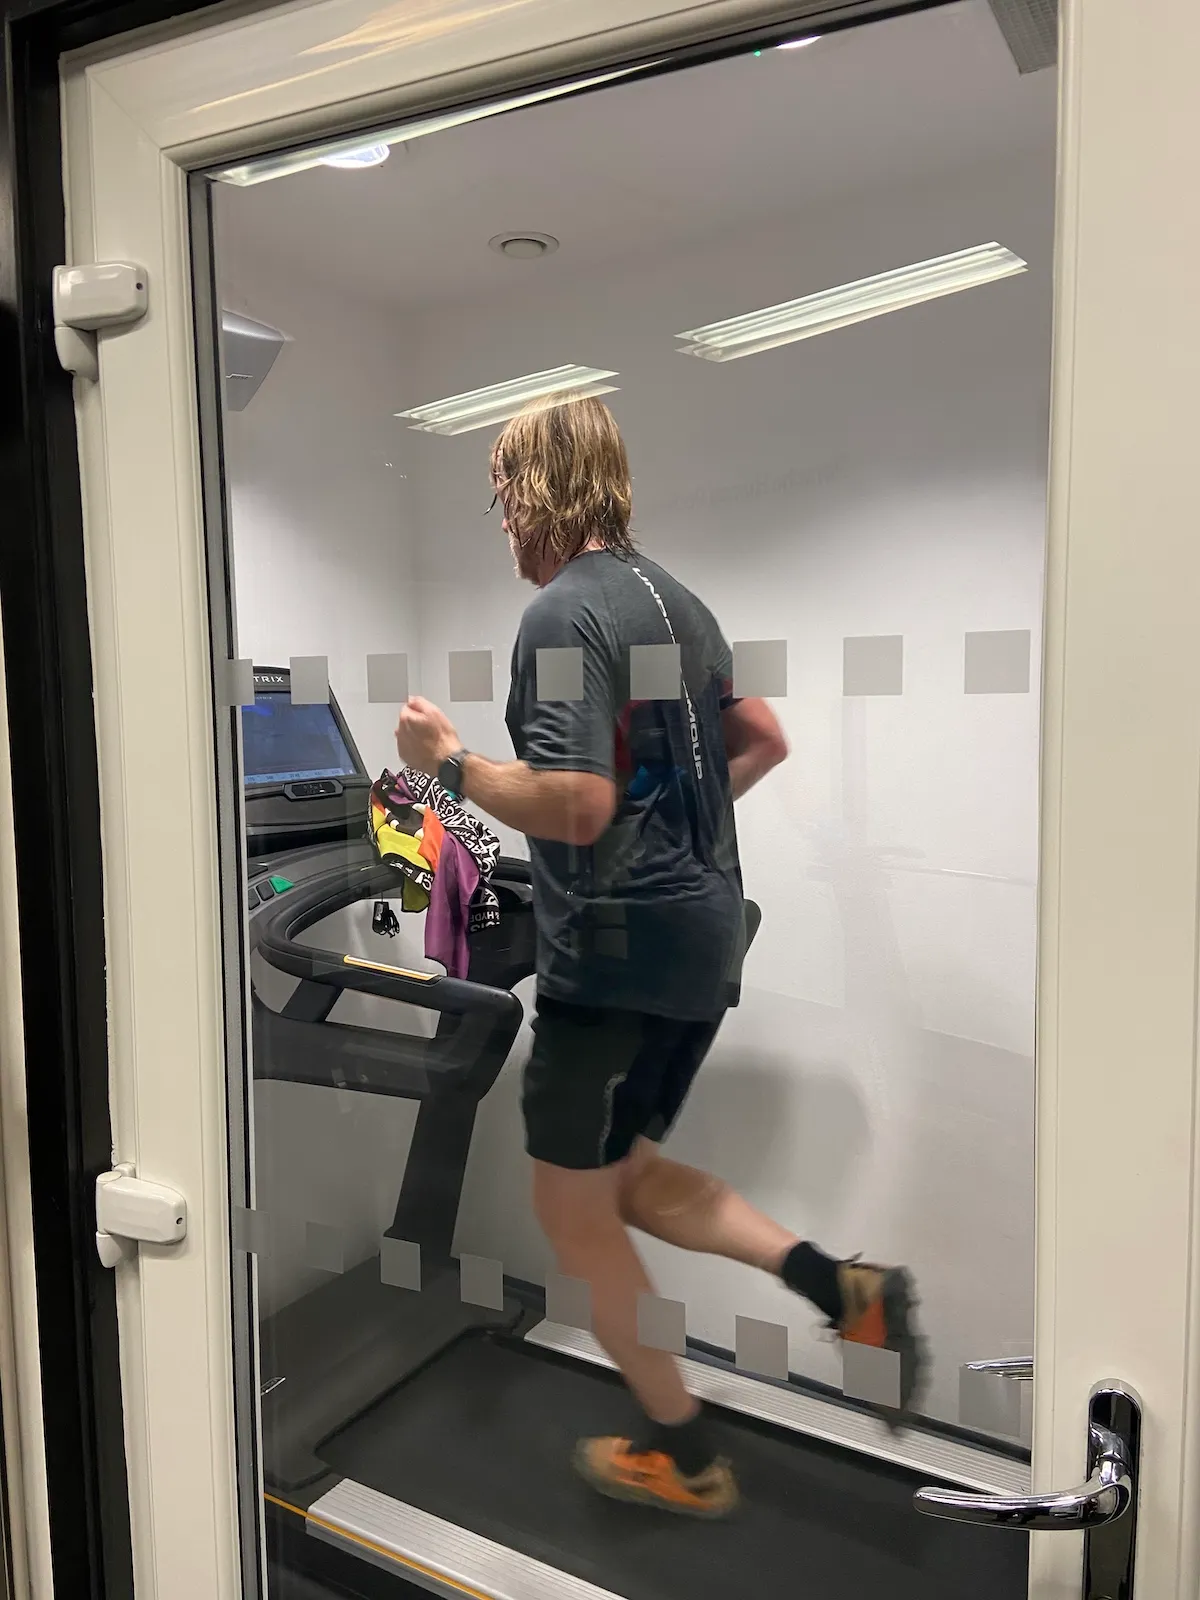 Writer James Witts runs on the treadmill in a heat chamber in conditions set to simulate Kona